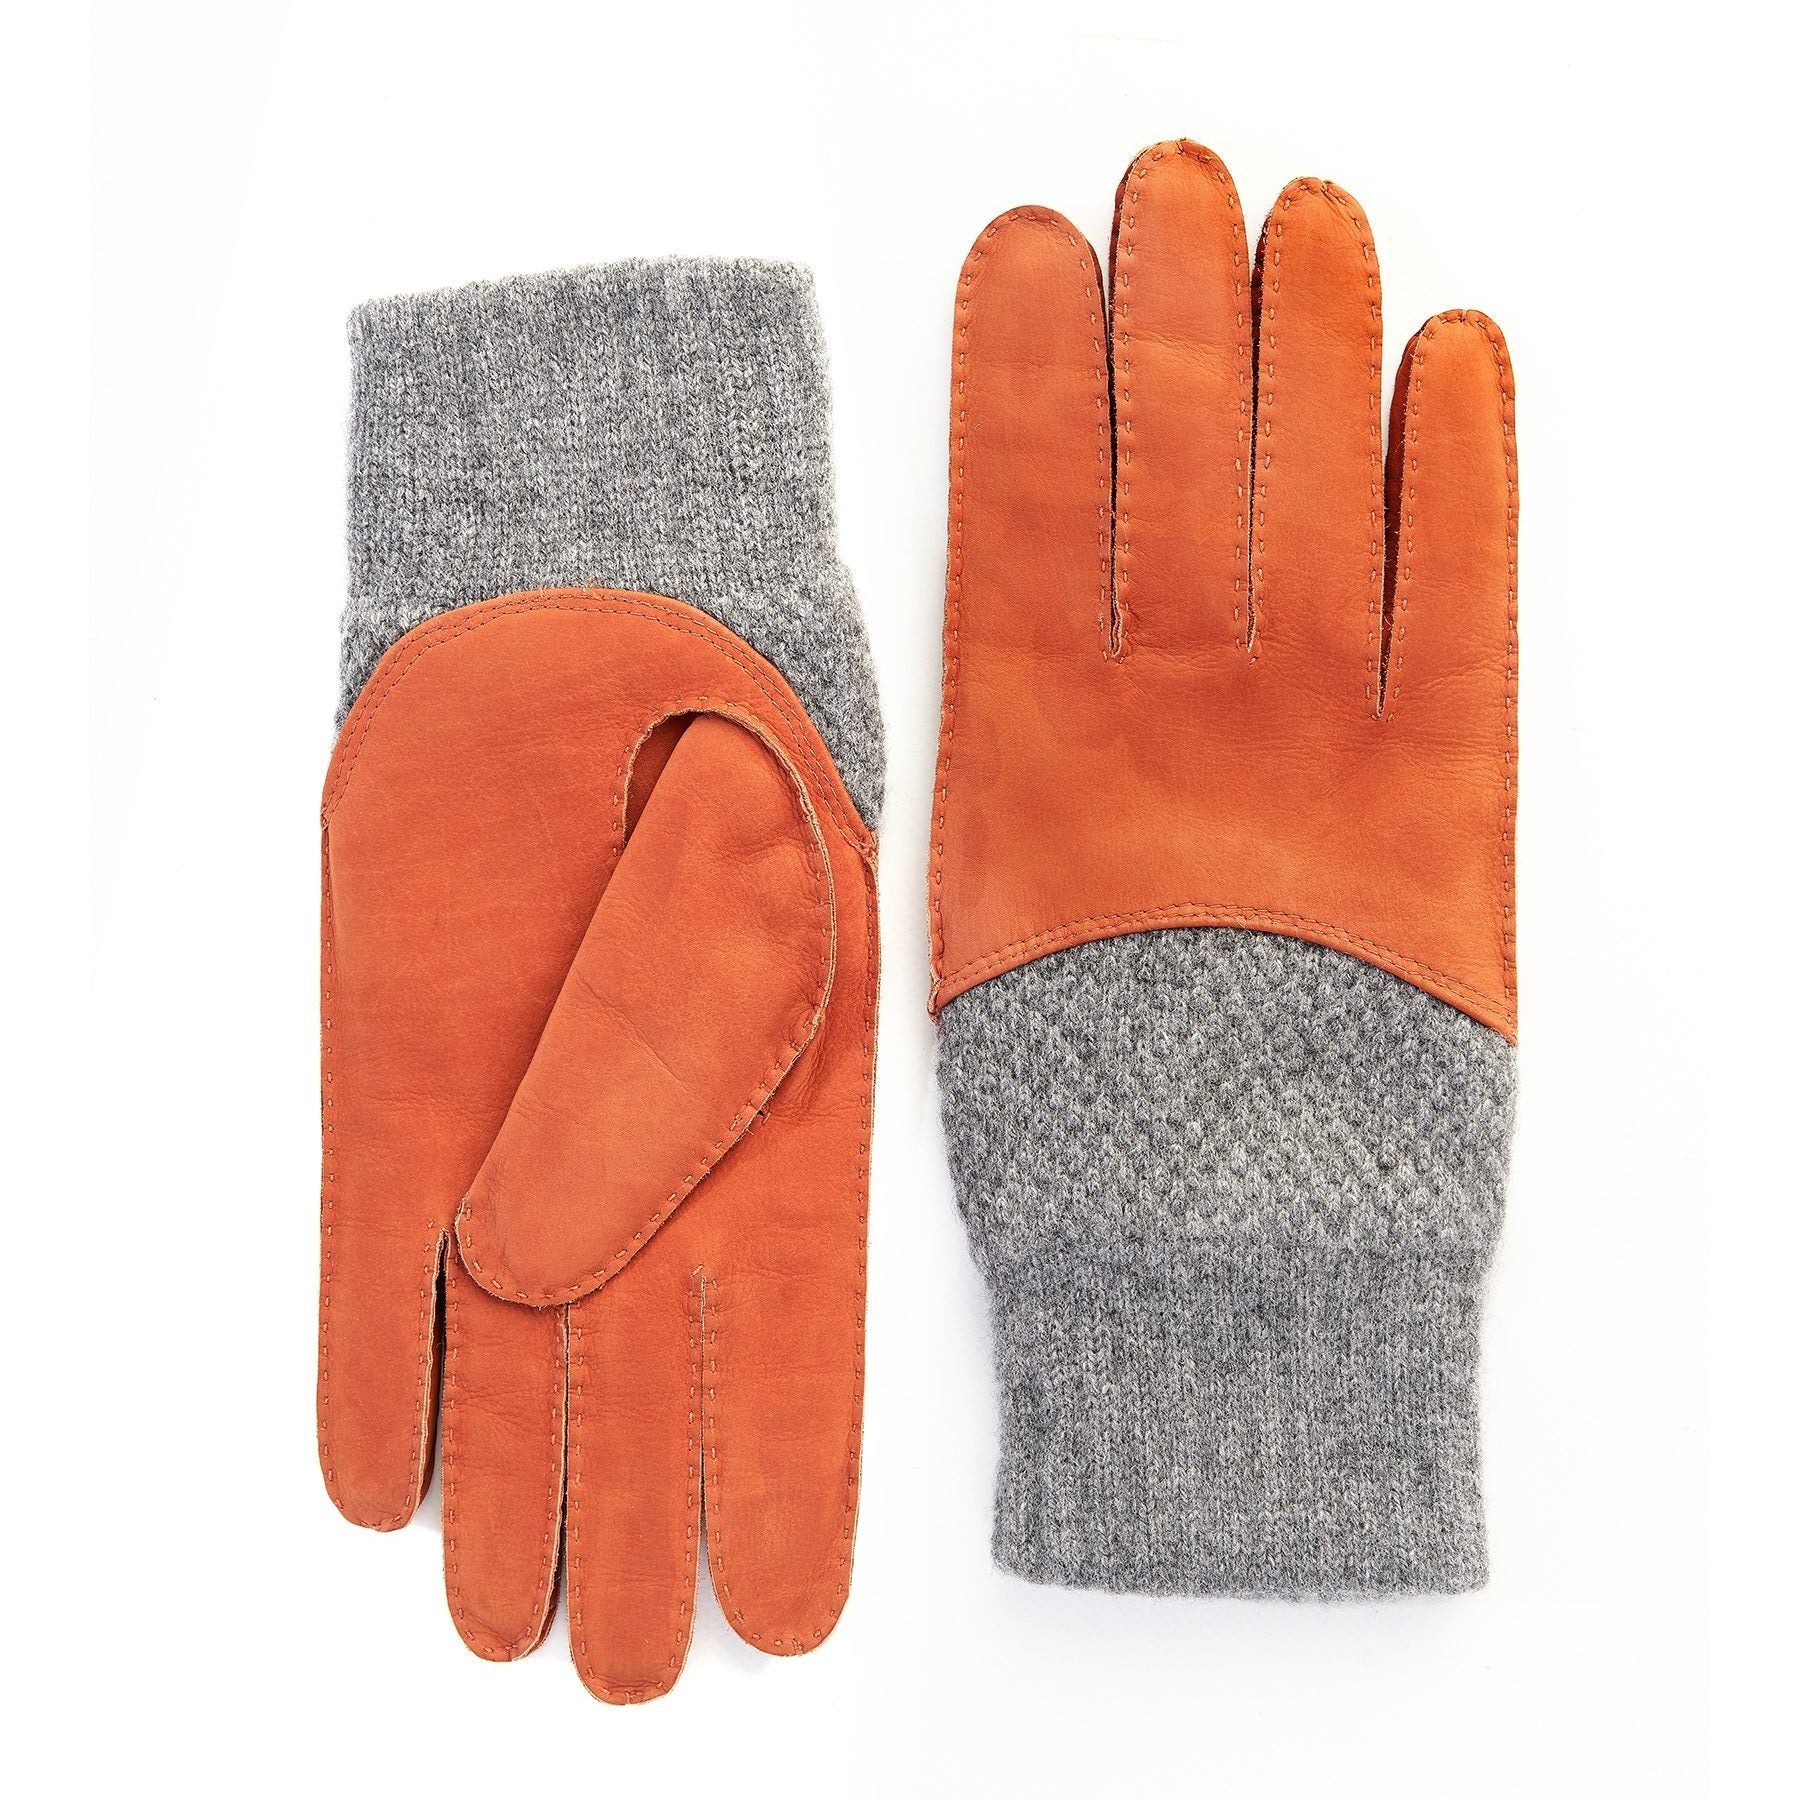 Men's hand-stitched nubuk gloves in color orange with grey cashmere top and lining